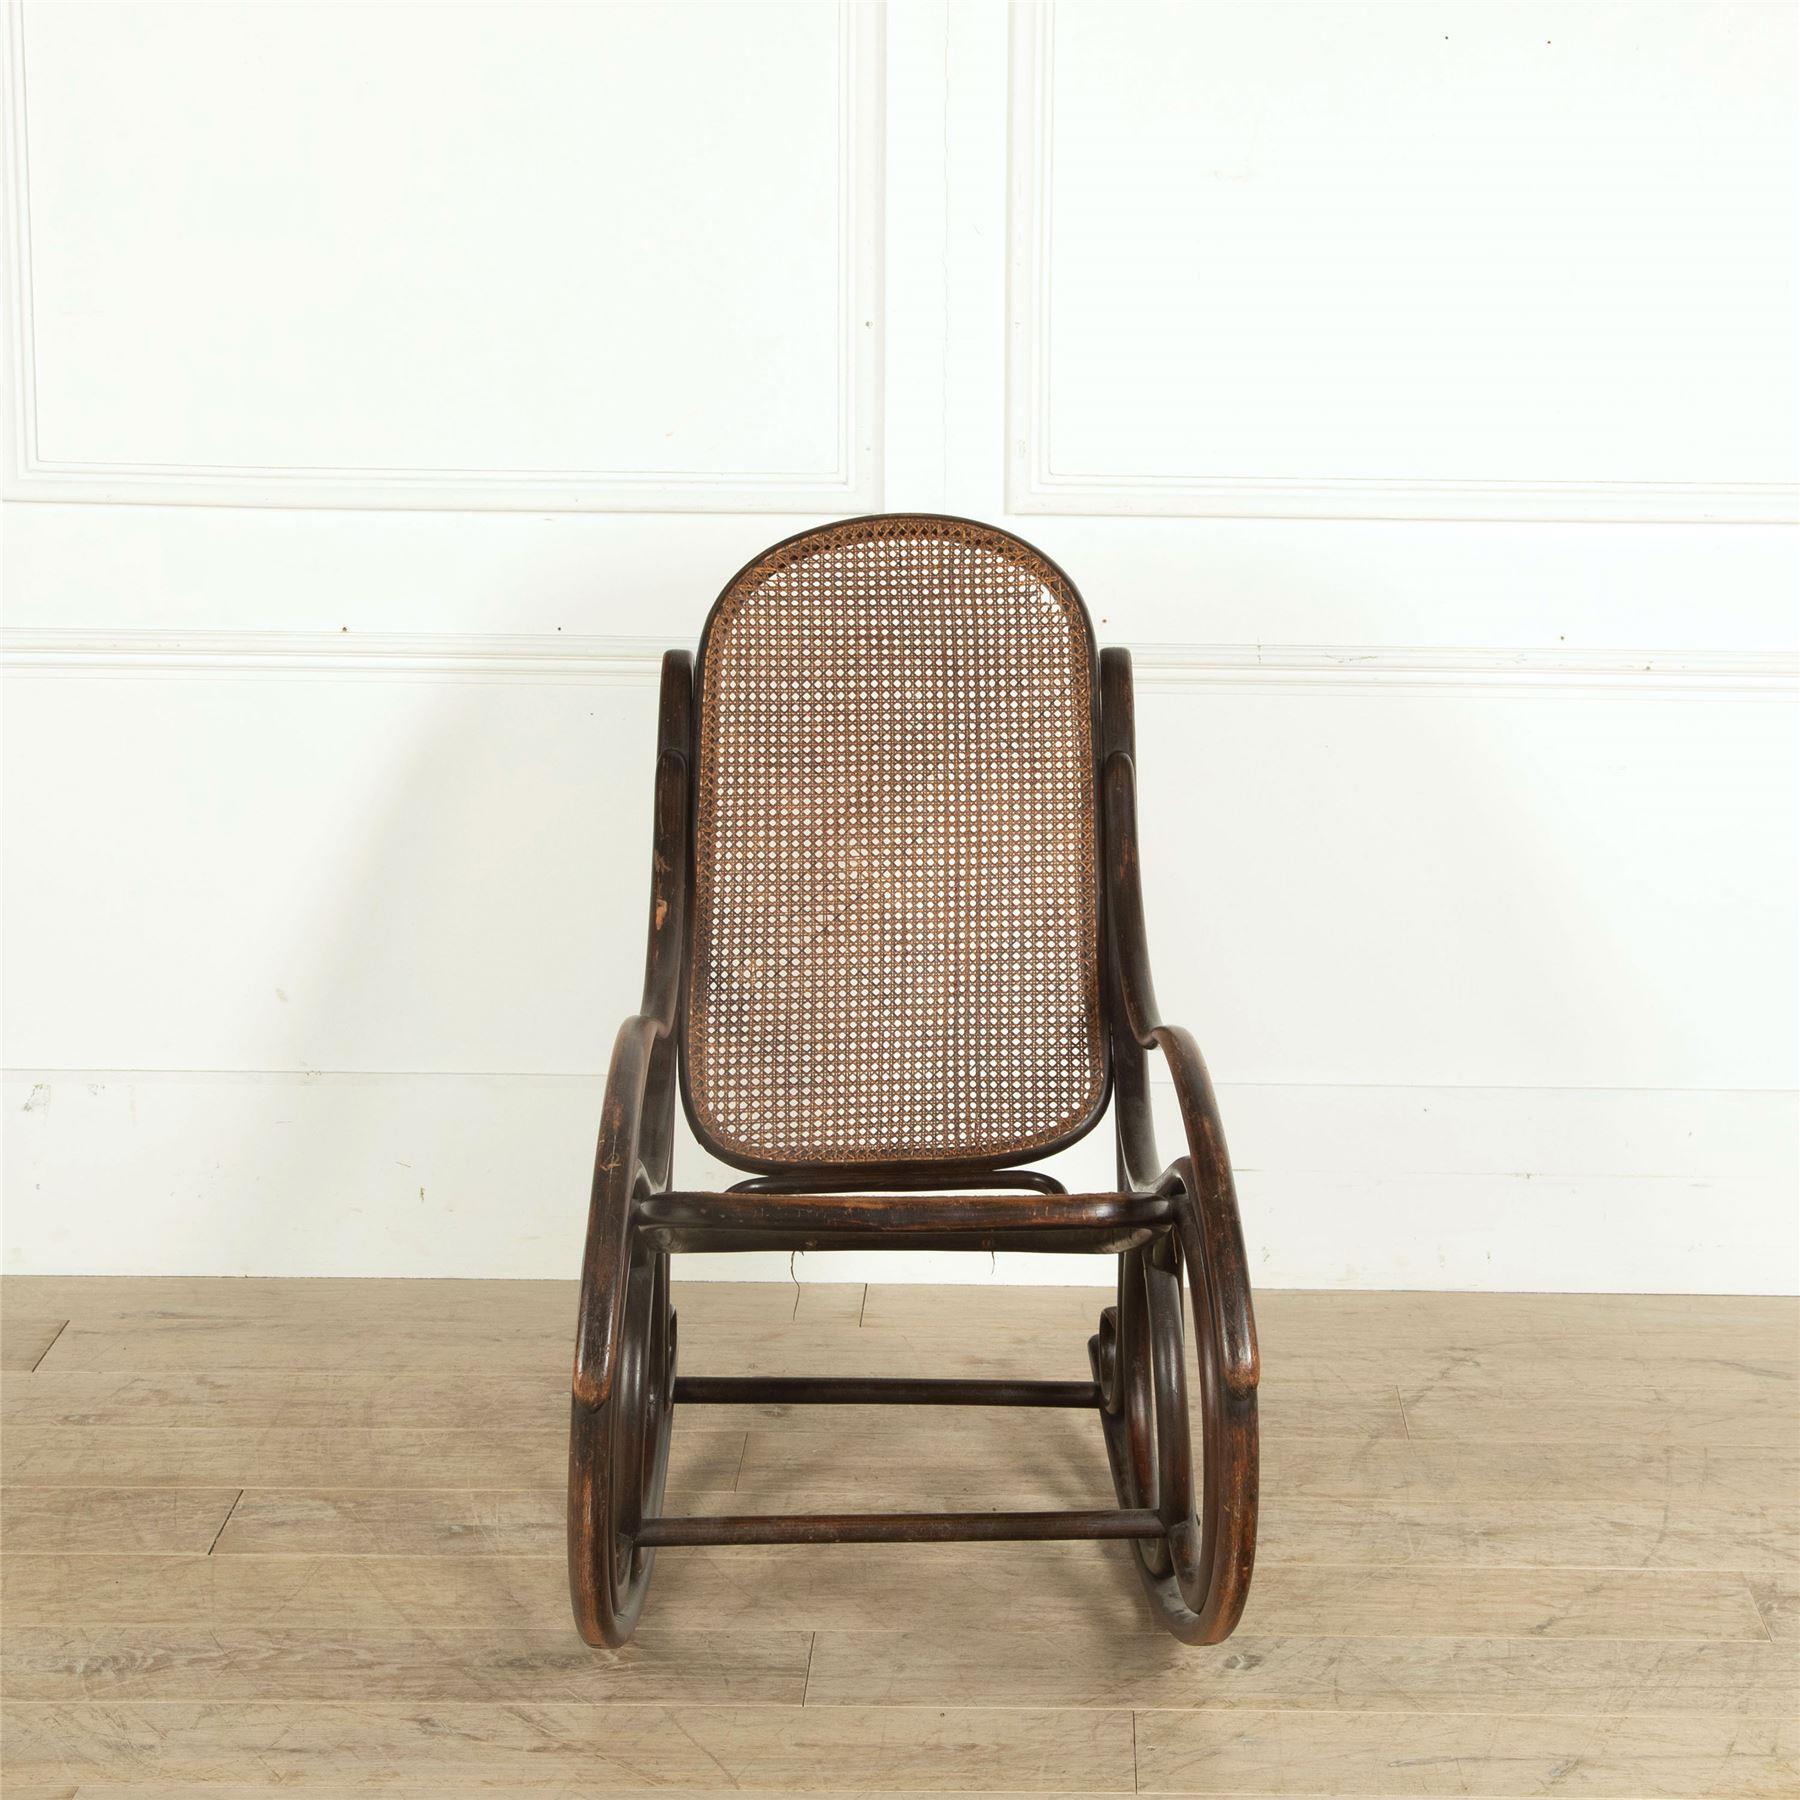 A late 19th century Thonet bentwood and cane rocking chair.